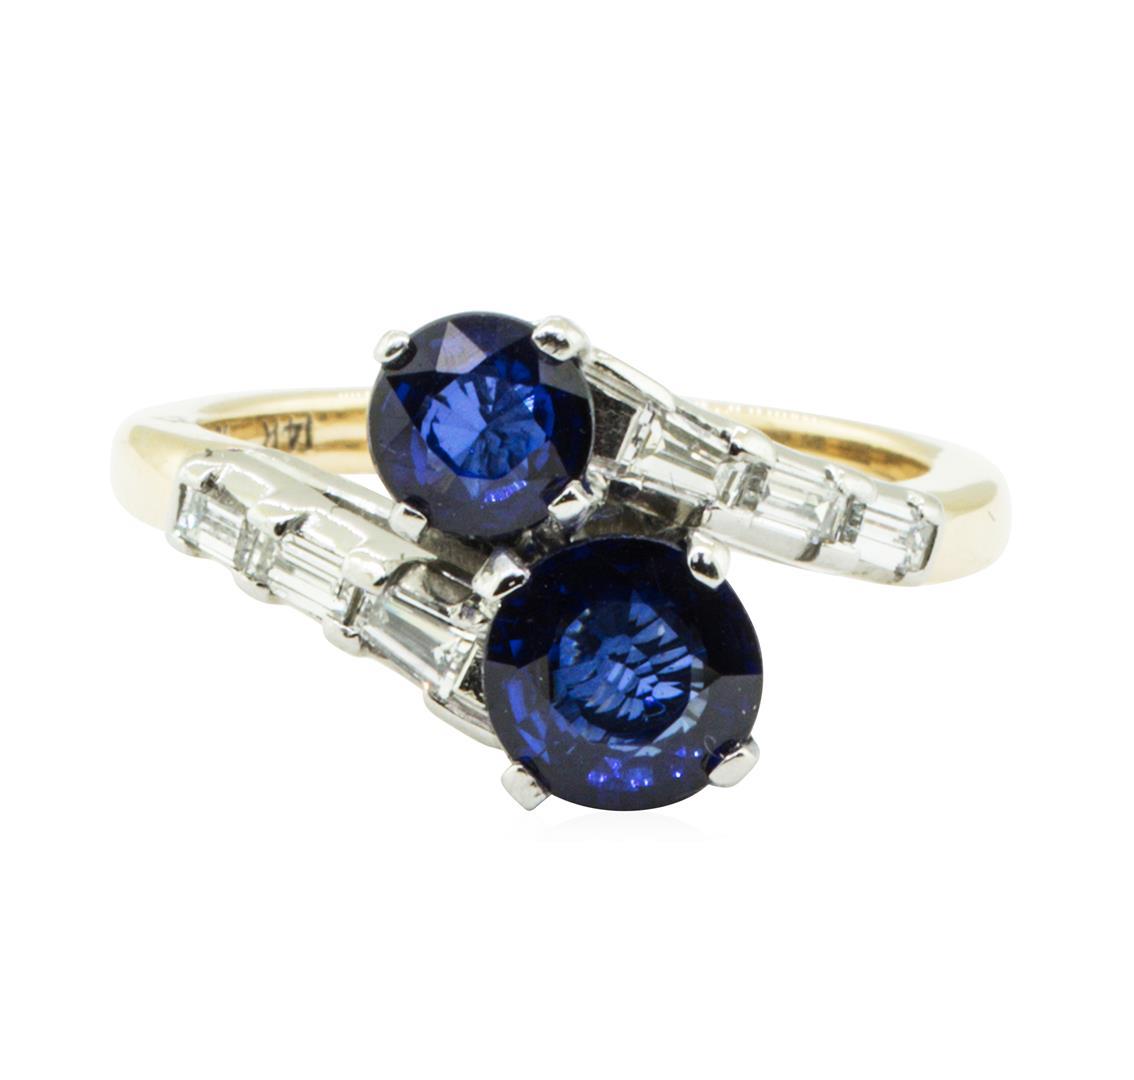 2.07 ctw Oval Brilliant Blue Sapphire Ring - 14KT Yellow Gold